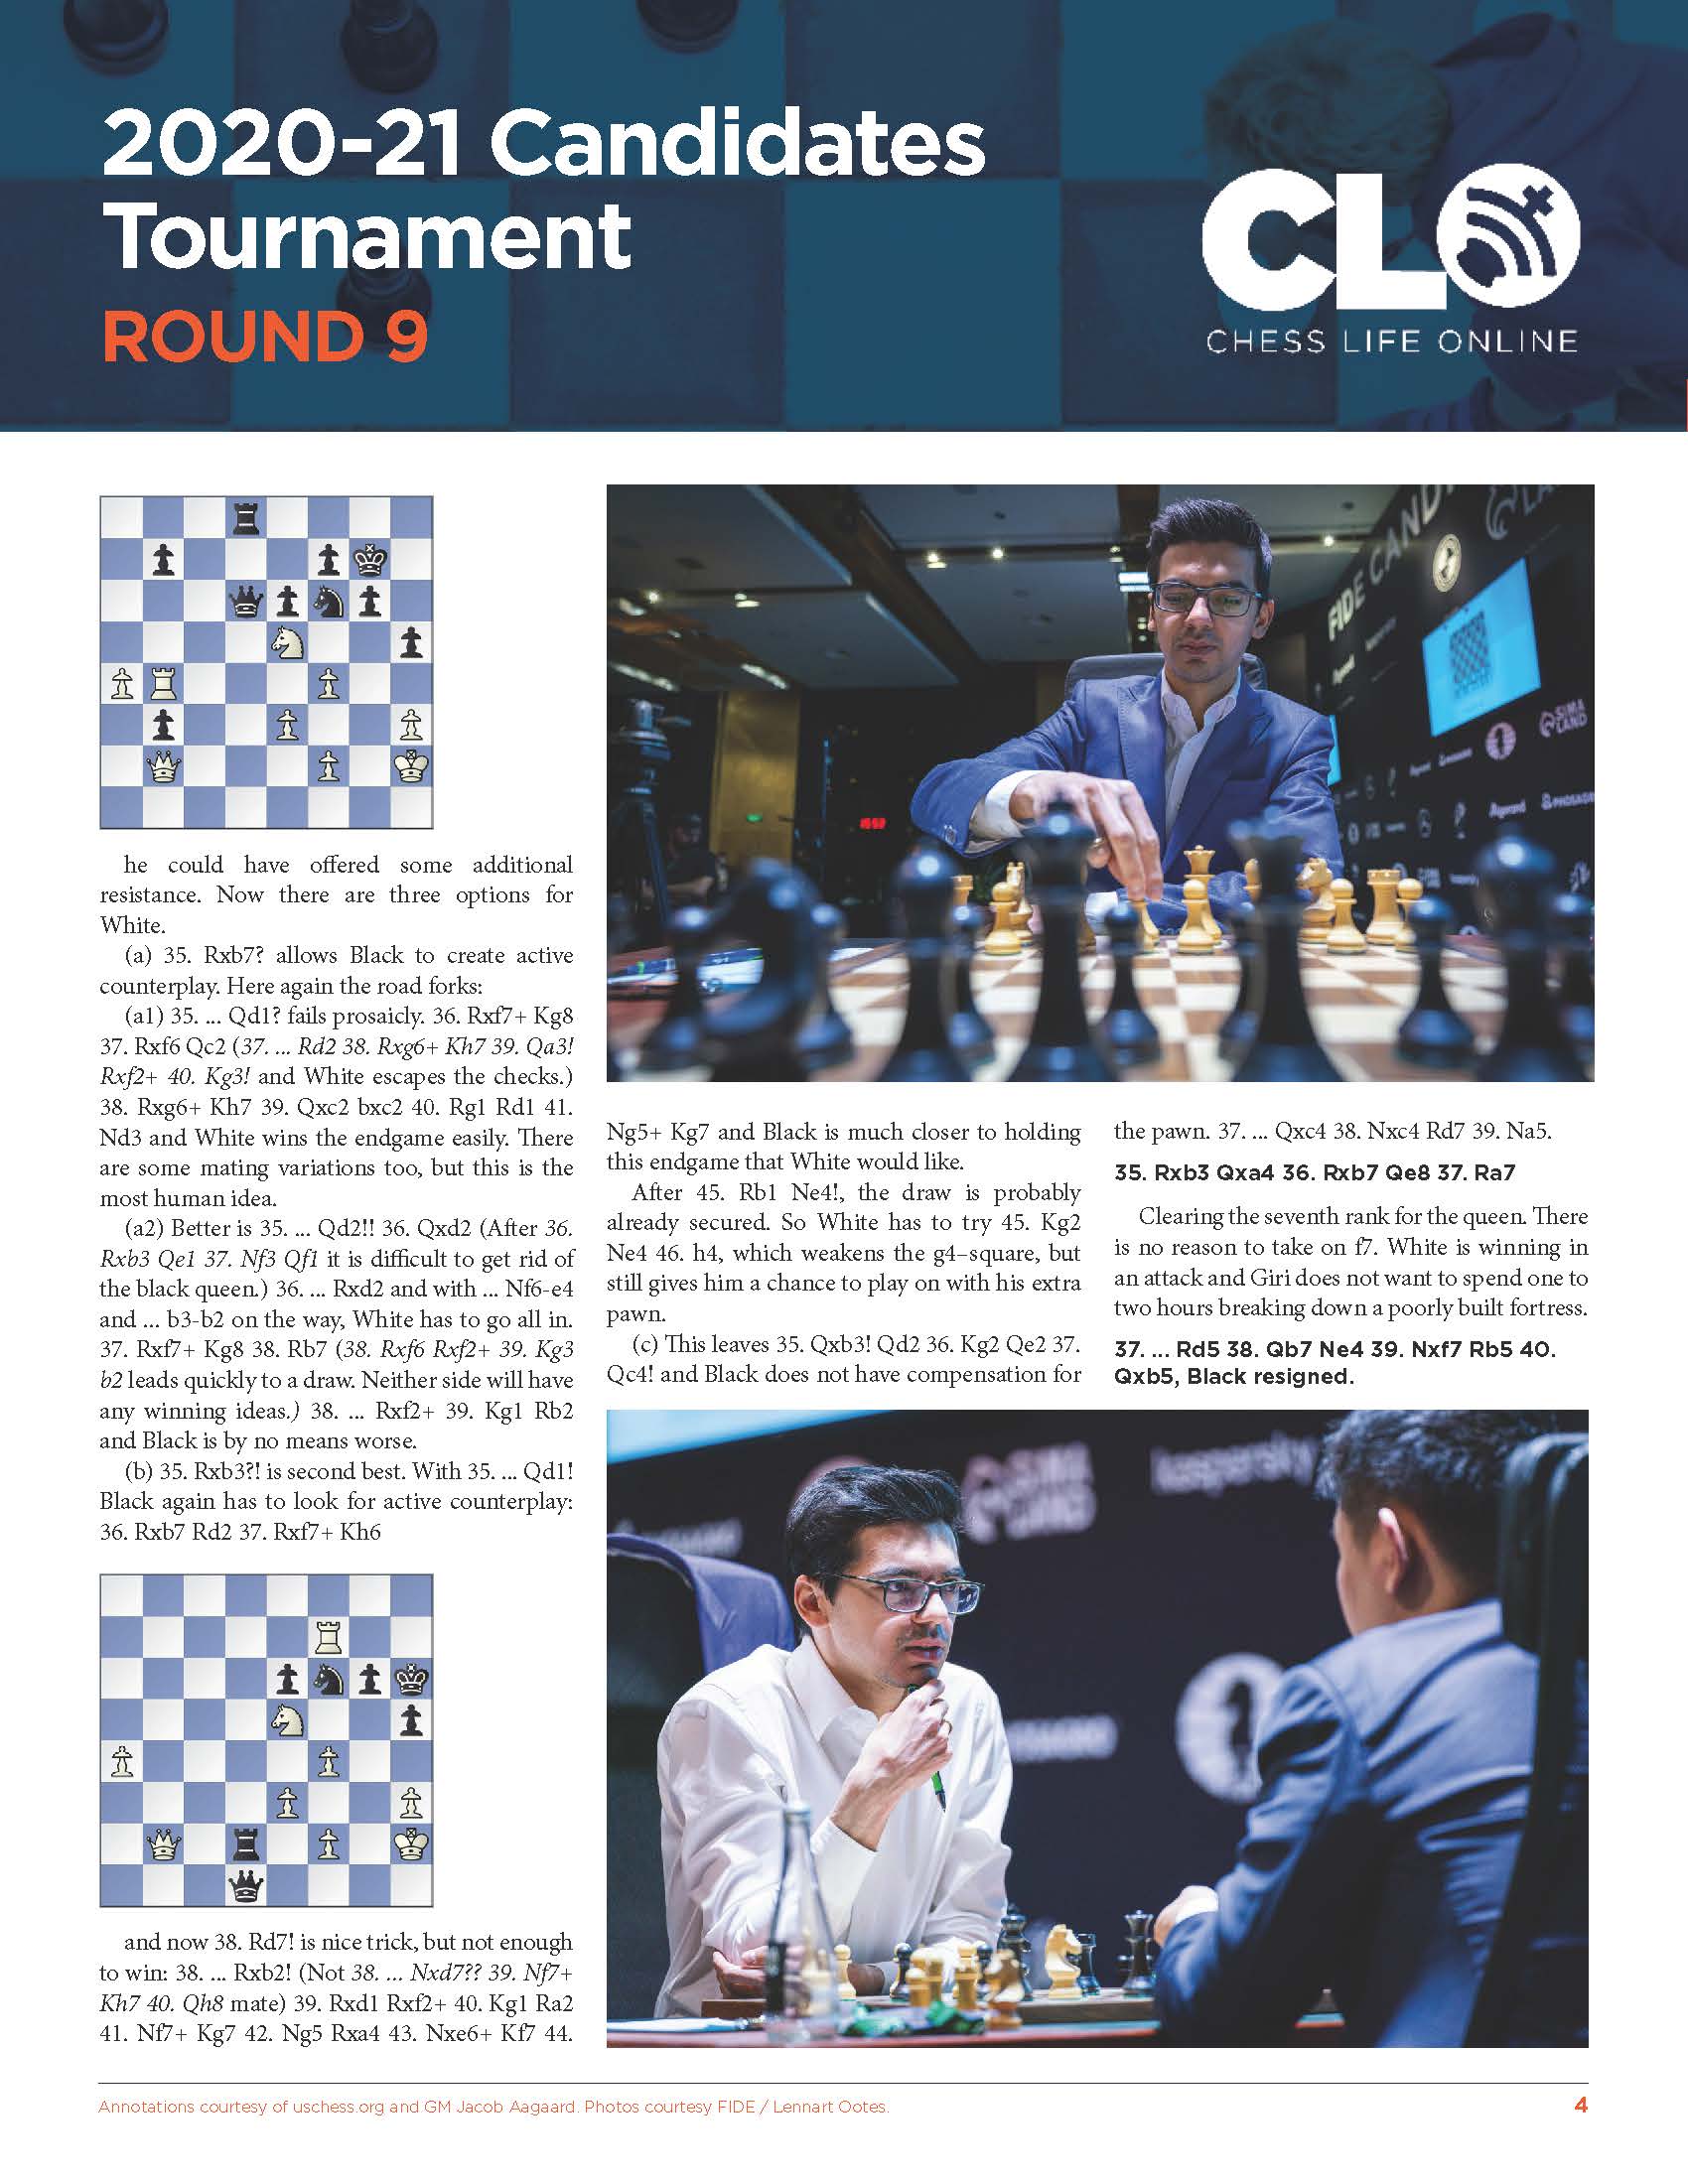 Giri wins Candidates Round 9, Joins Caruana, MVL in second place